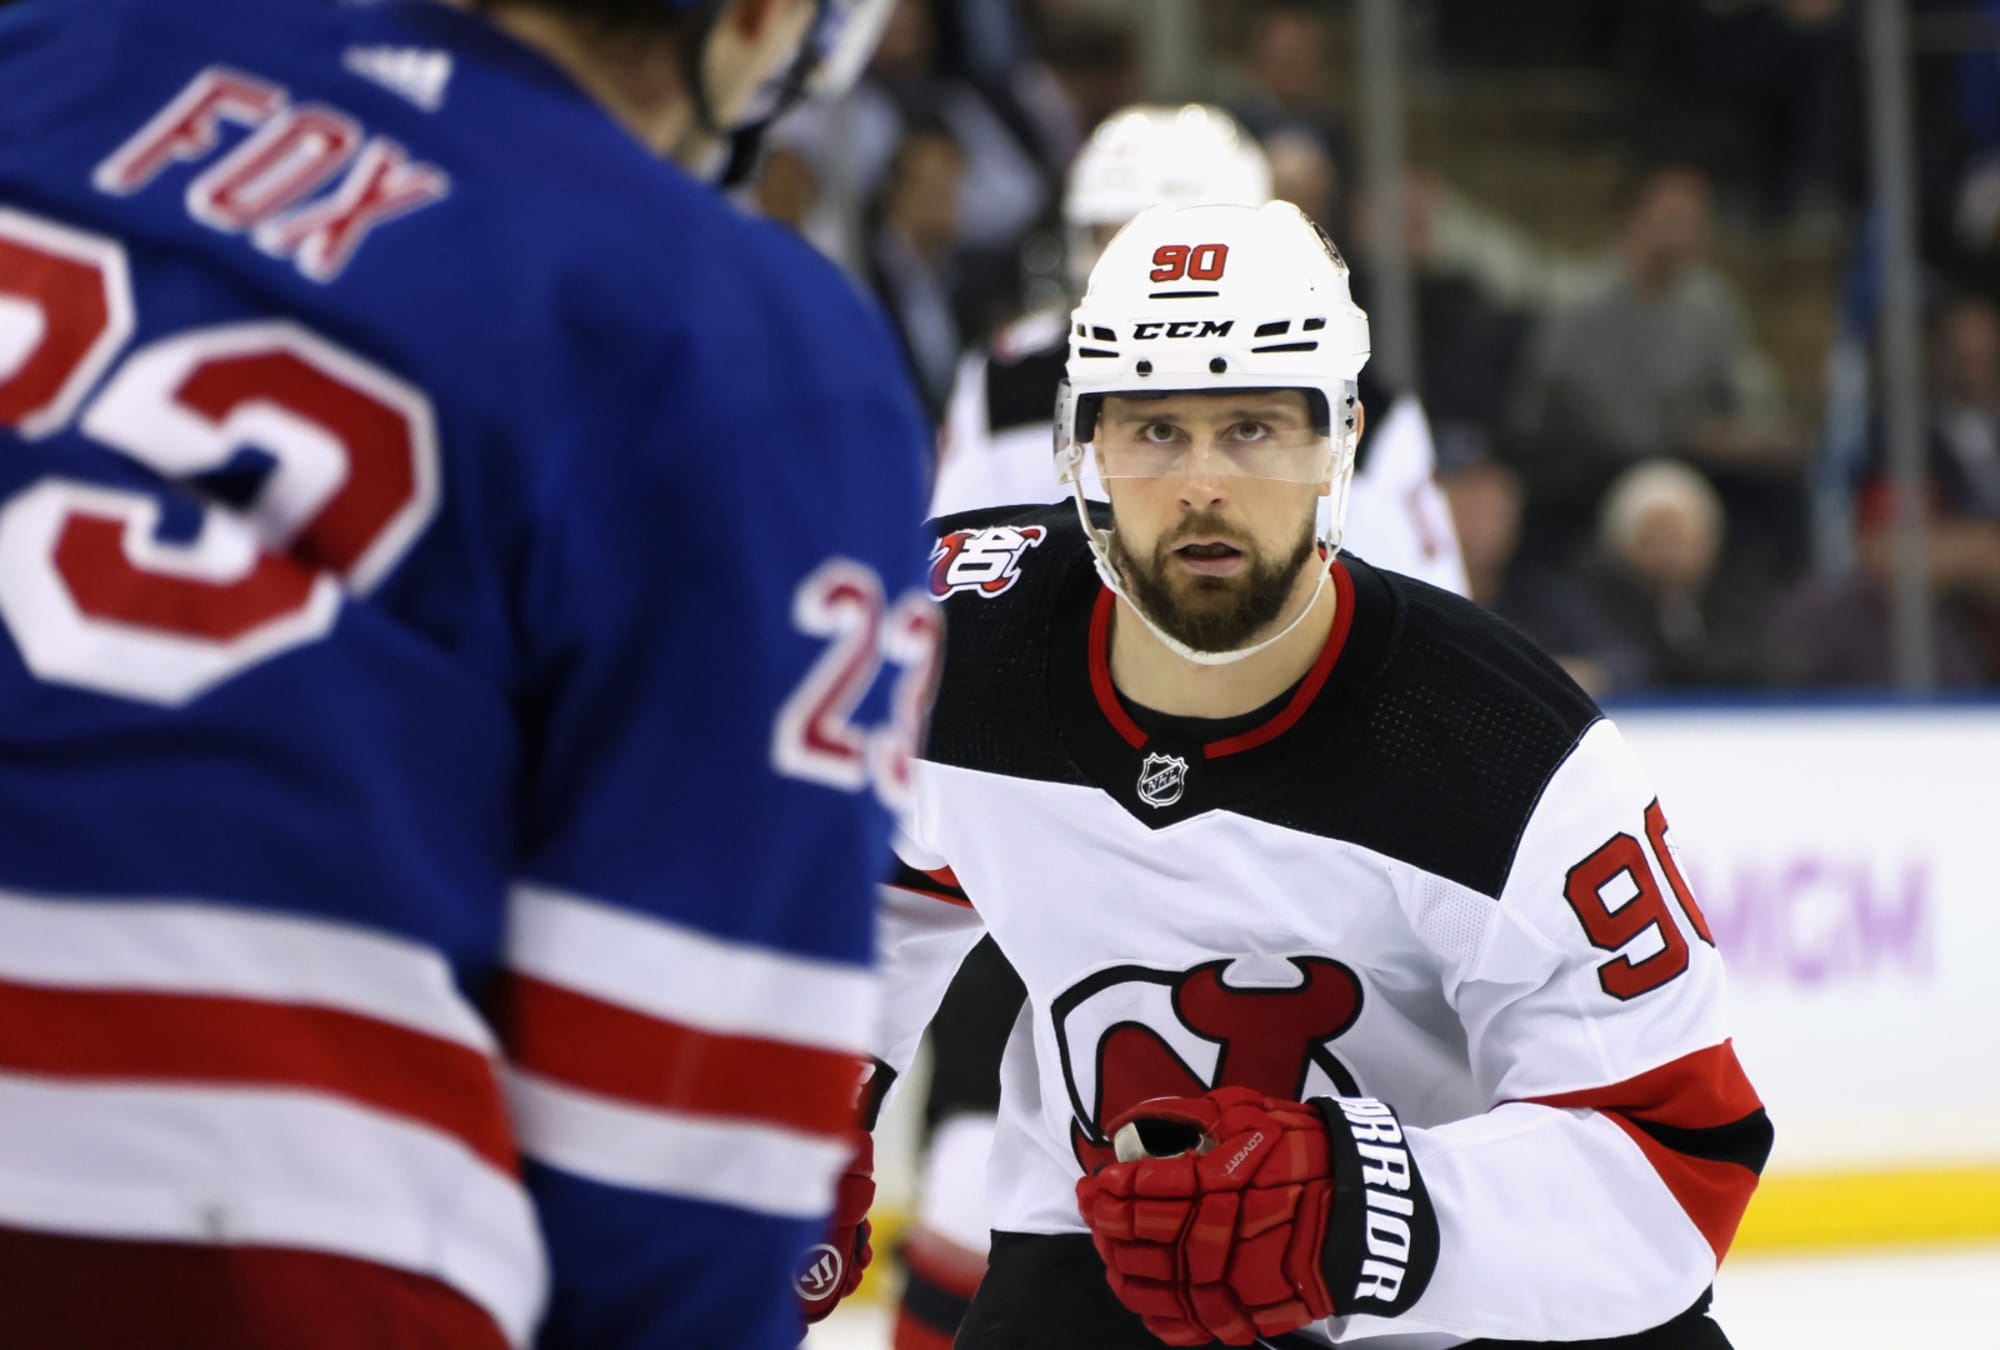 Did Tomas Tatar Cost Himself an Extension with Playoff Performance?